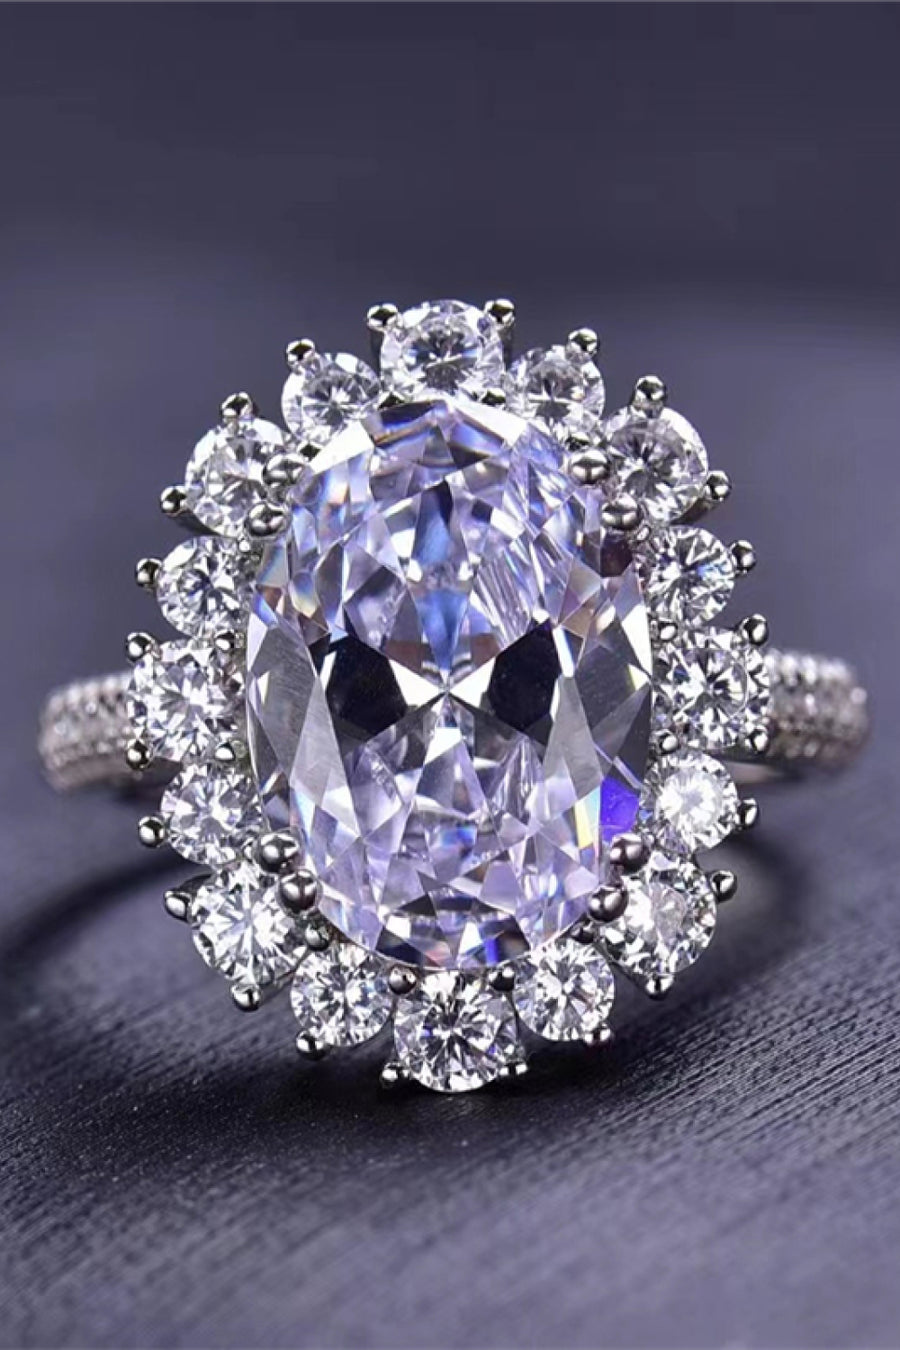 Oval Moissanite ring, Lab-created gemstone, 8-carat statement piece, Sparkling centerpiece, Luxury jewelry, Elegant design, High-quality craftsmanship, Timeless beauty, Fine jewelry accessory, Glamorous oval ring.